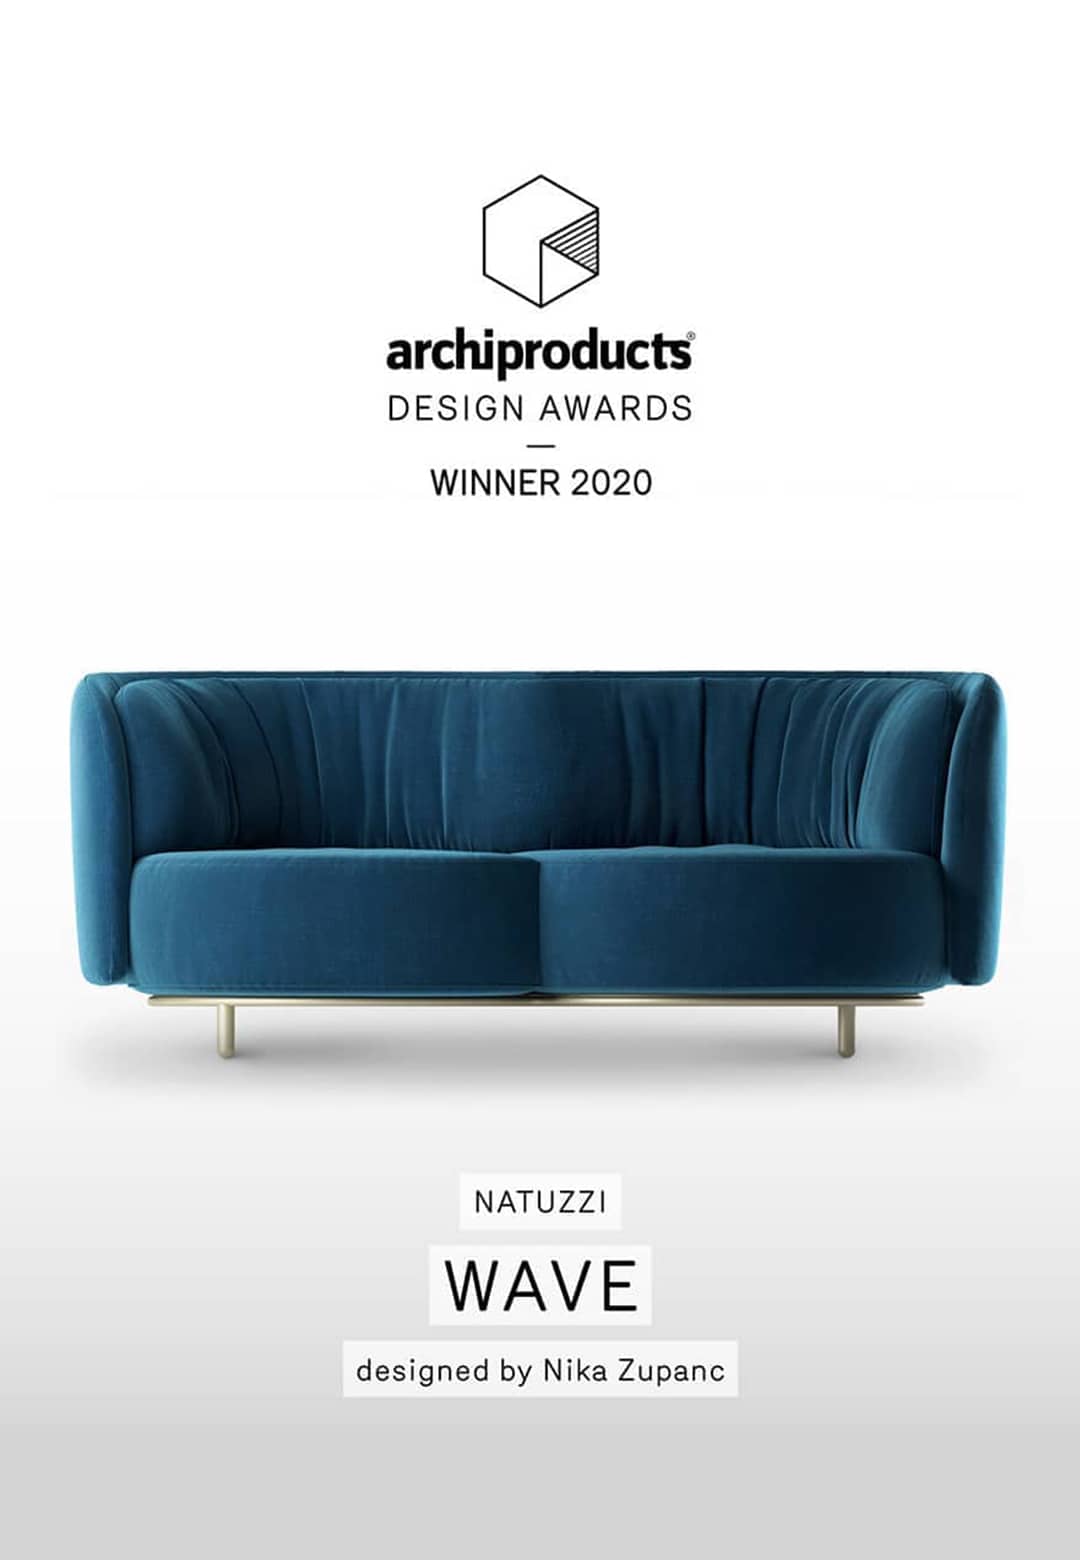 Archiproducts Design Awards 2020